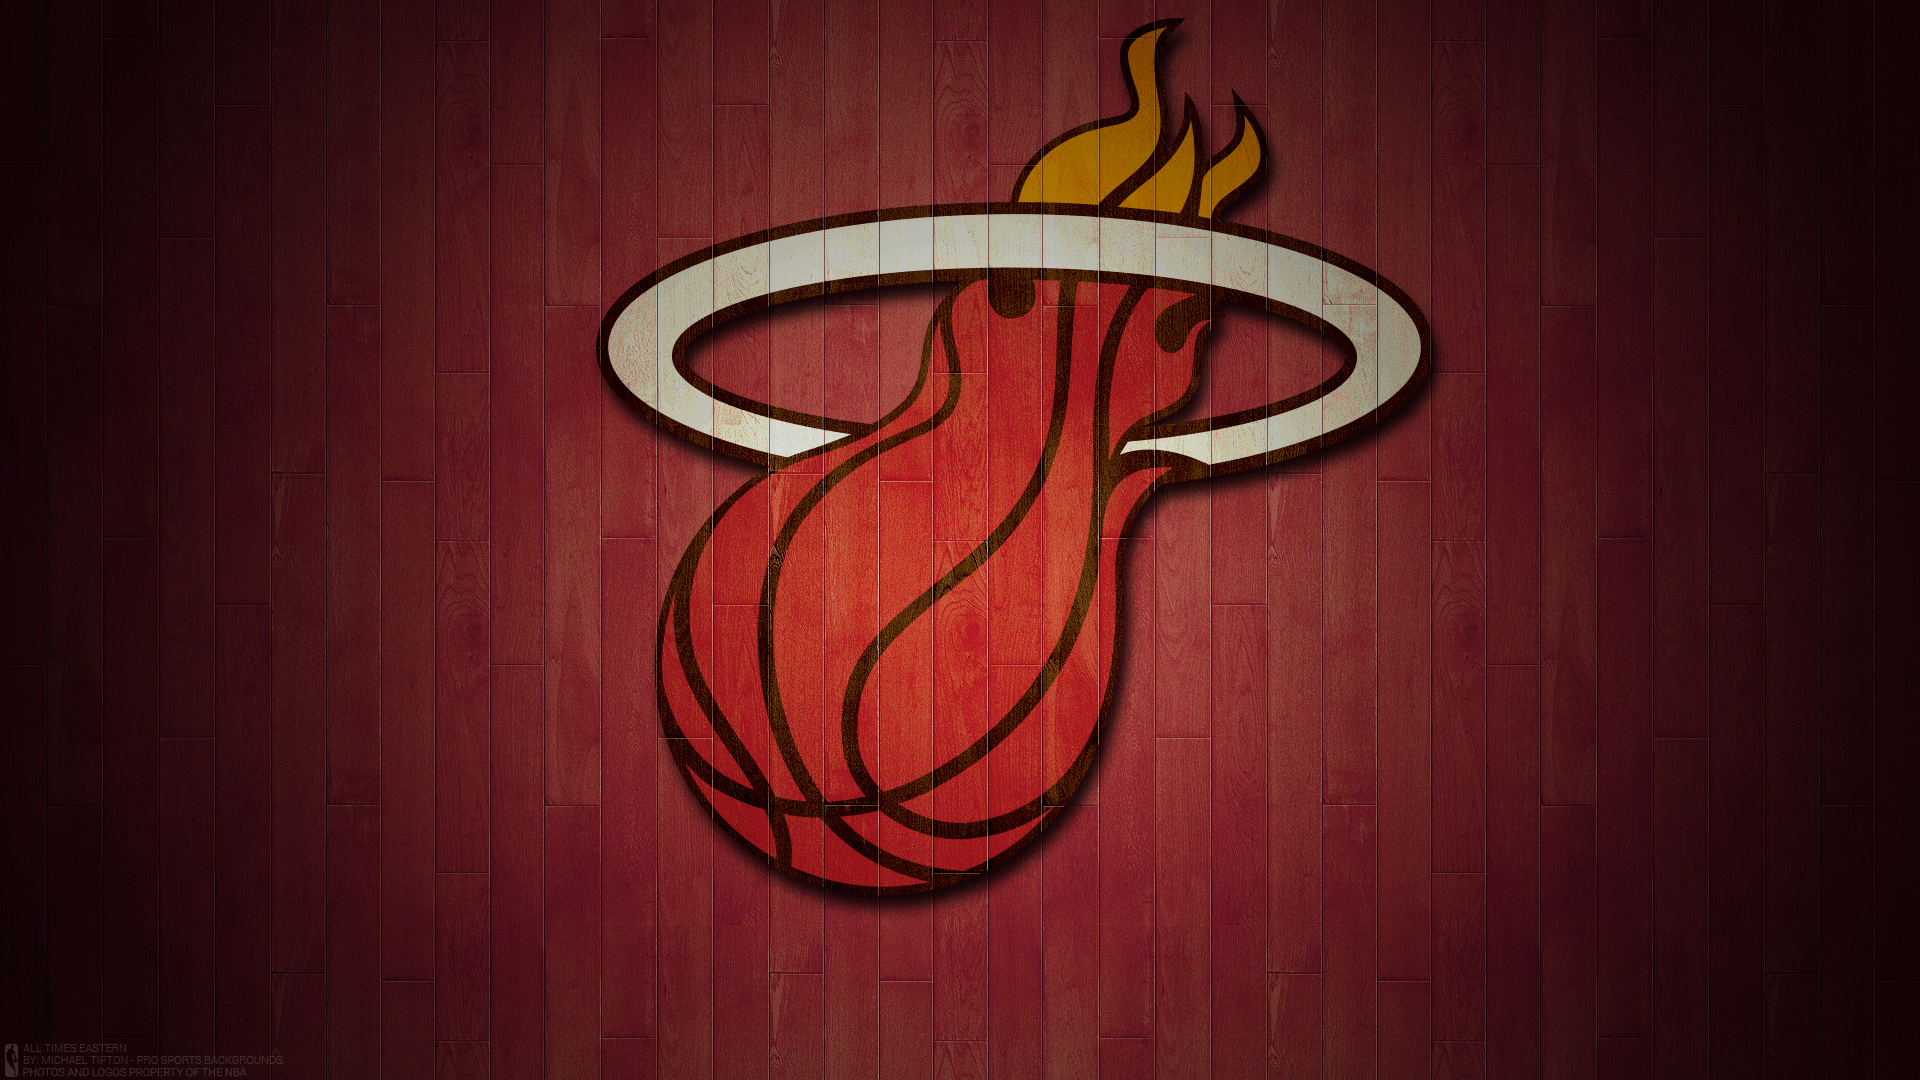 Miami Heat Wallpaper. iPhone. Android